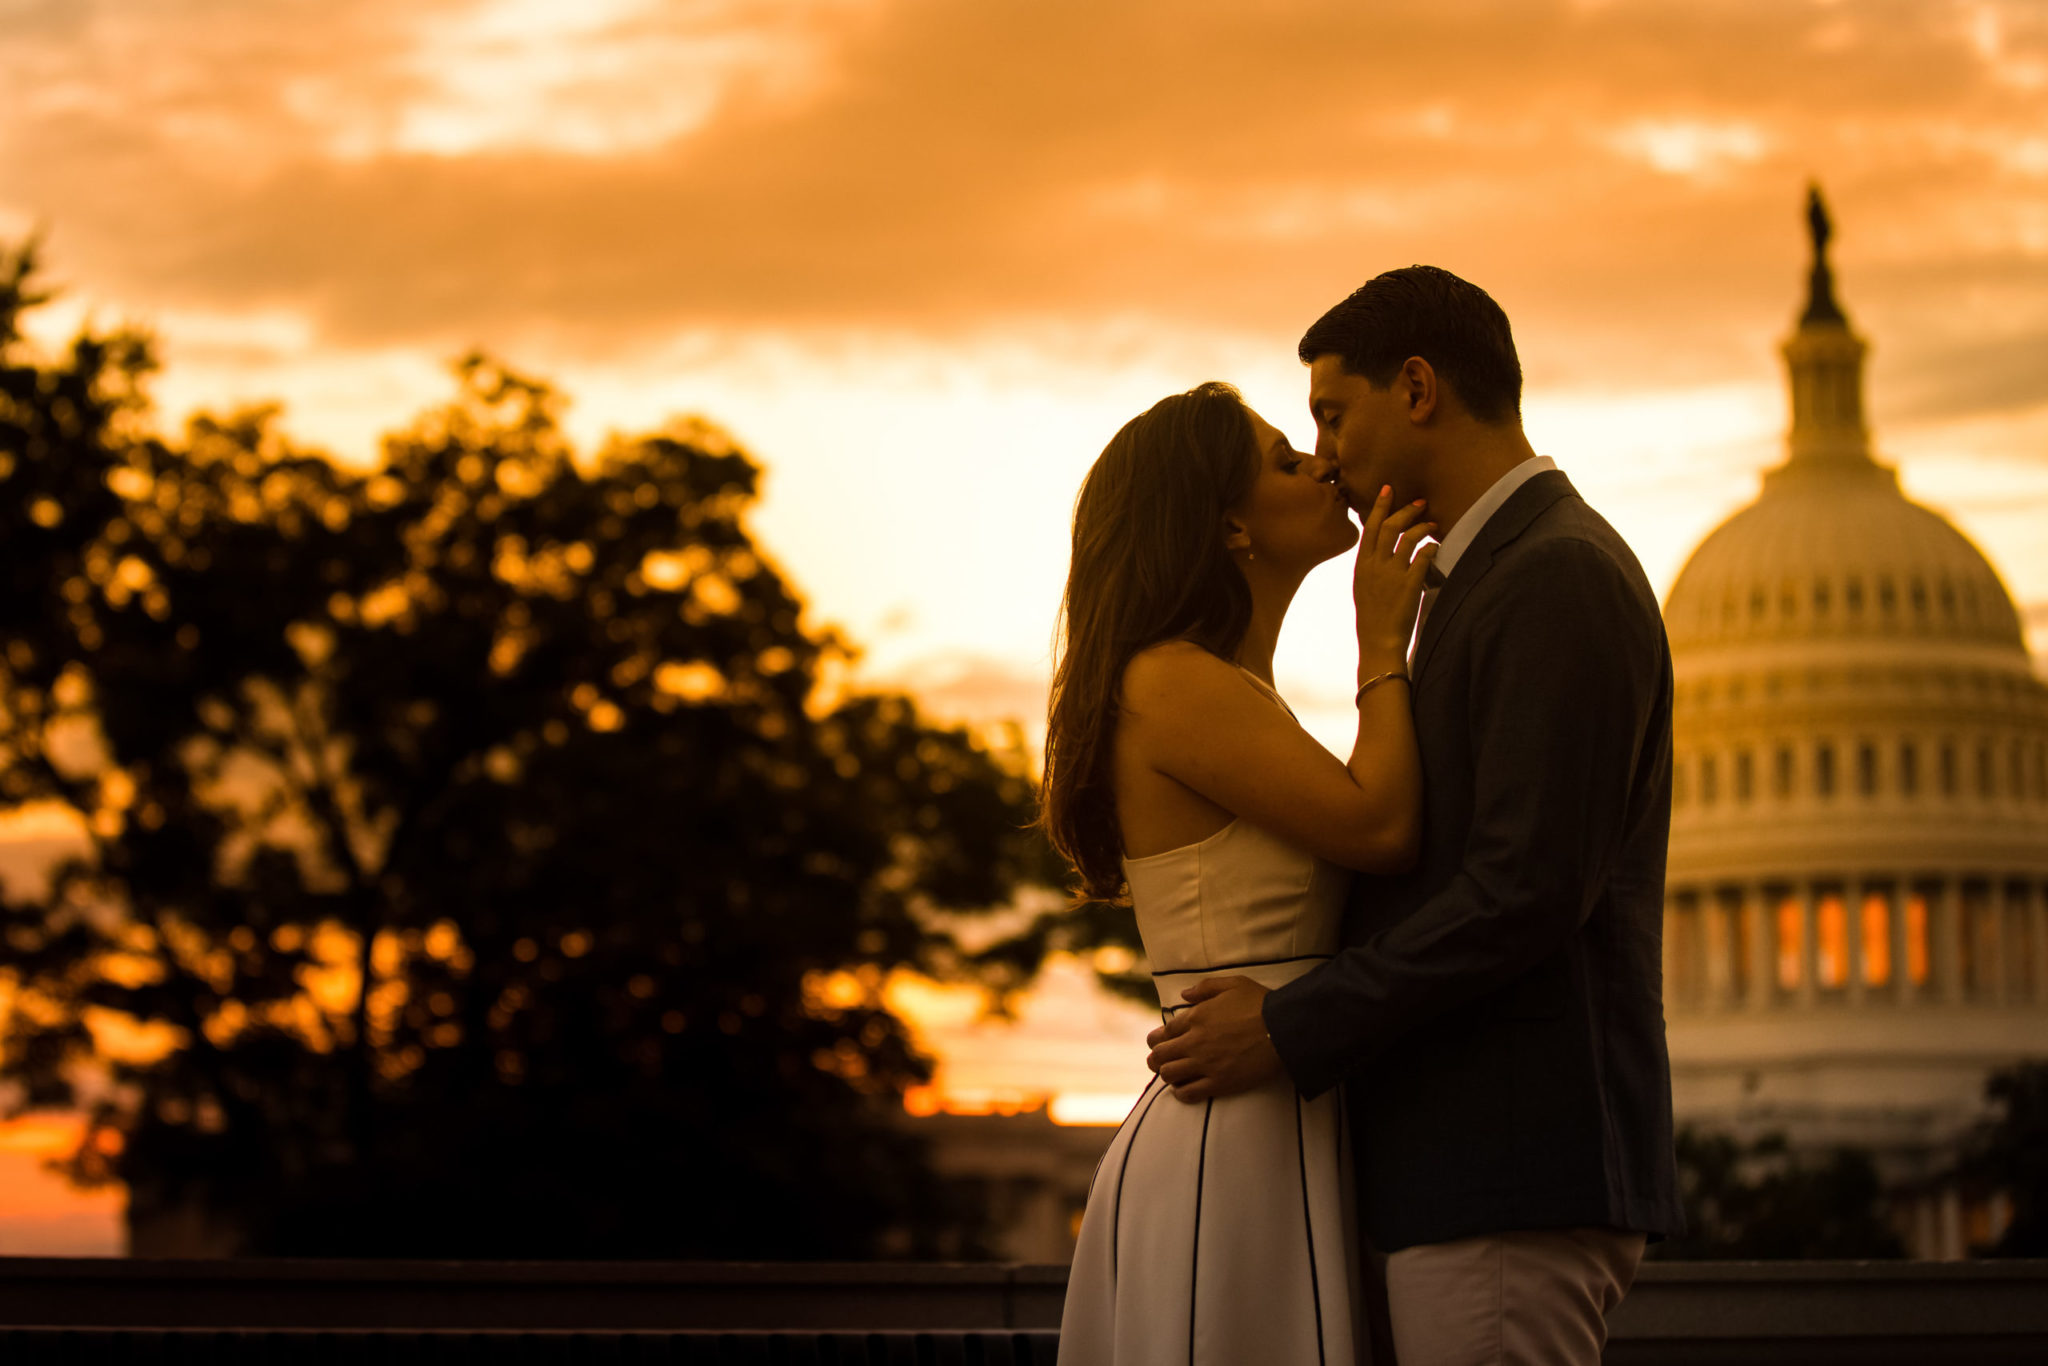 Washington DC Wedding Photographer, Lisa Rhinehart, captures this golden hour image of the bride and groom kissing as the sun sets behind them with DC monuments in the background behind them 